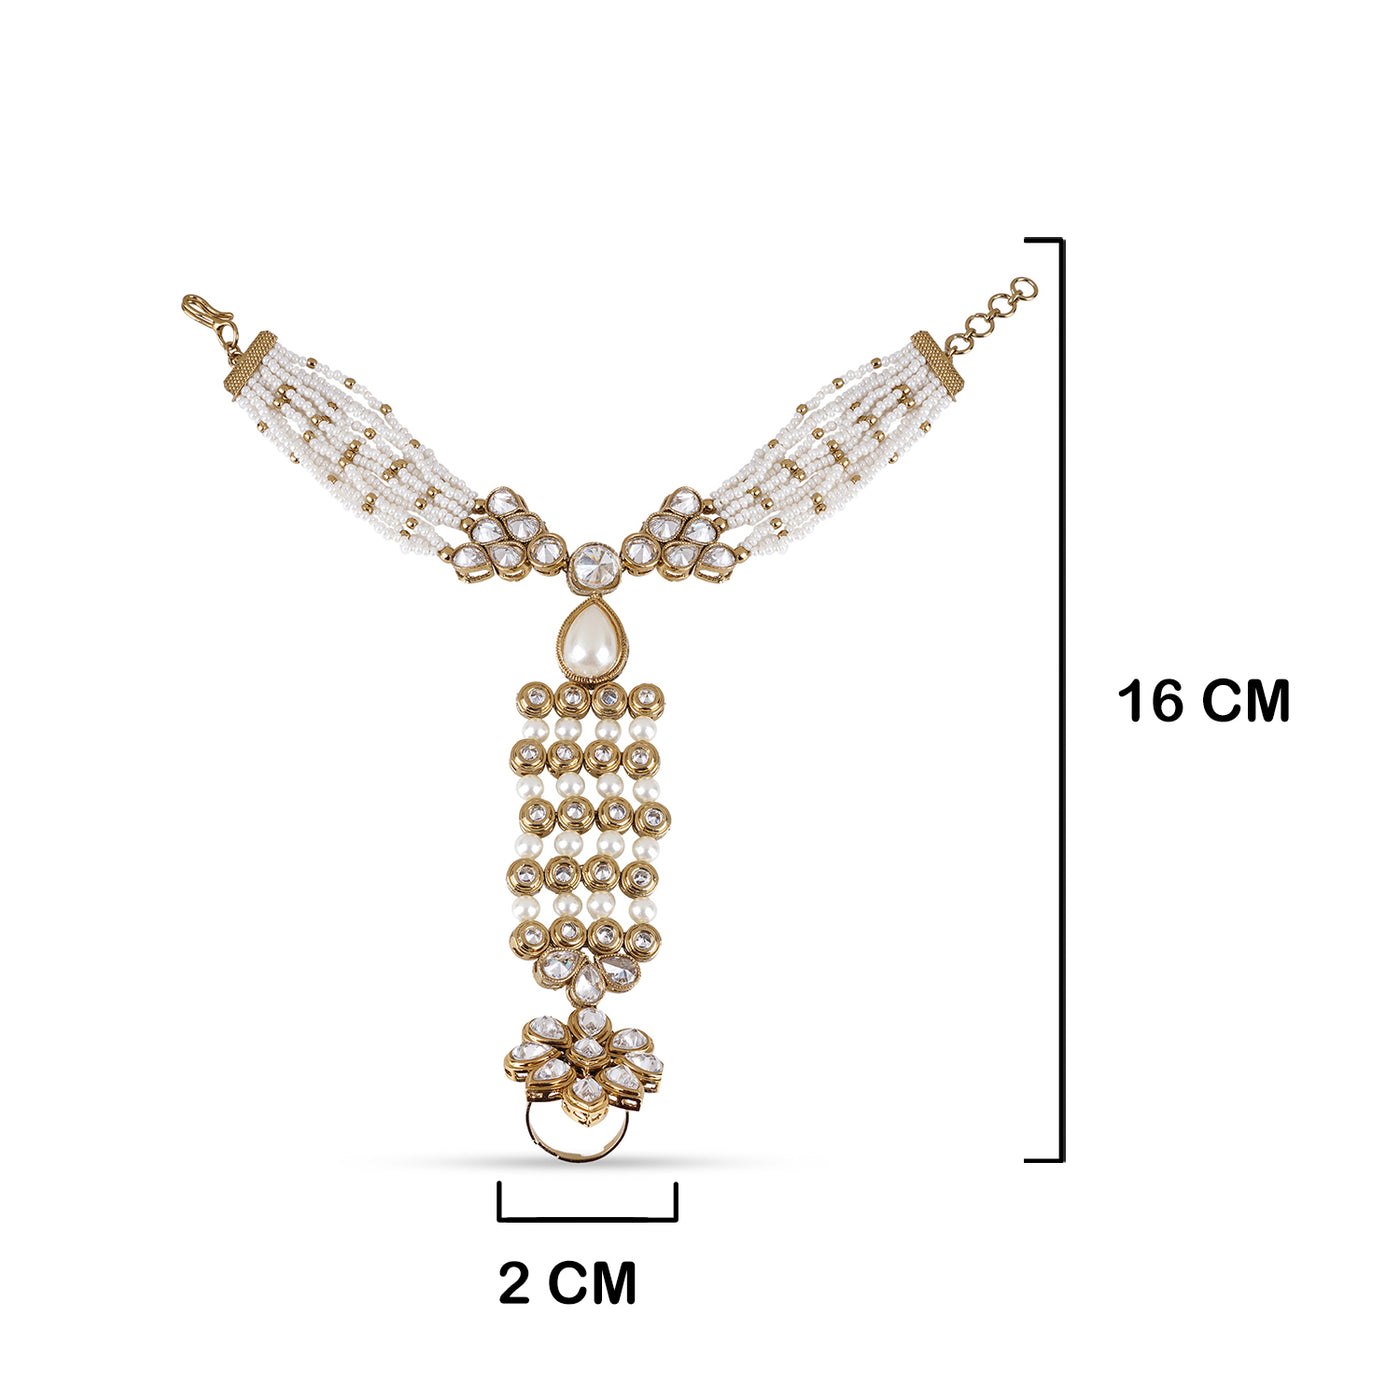 Pearled Kundan Haathphool with measurements in cm. 2cm by 16cm.